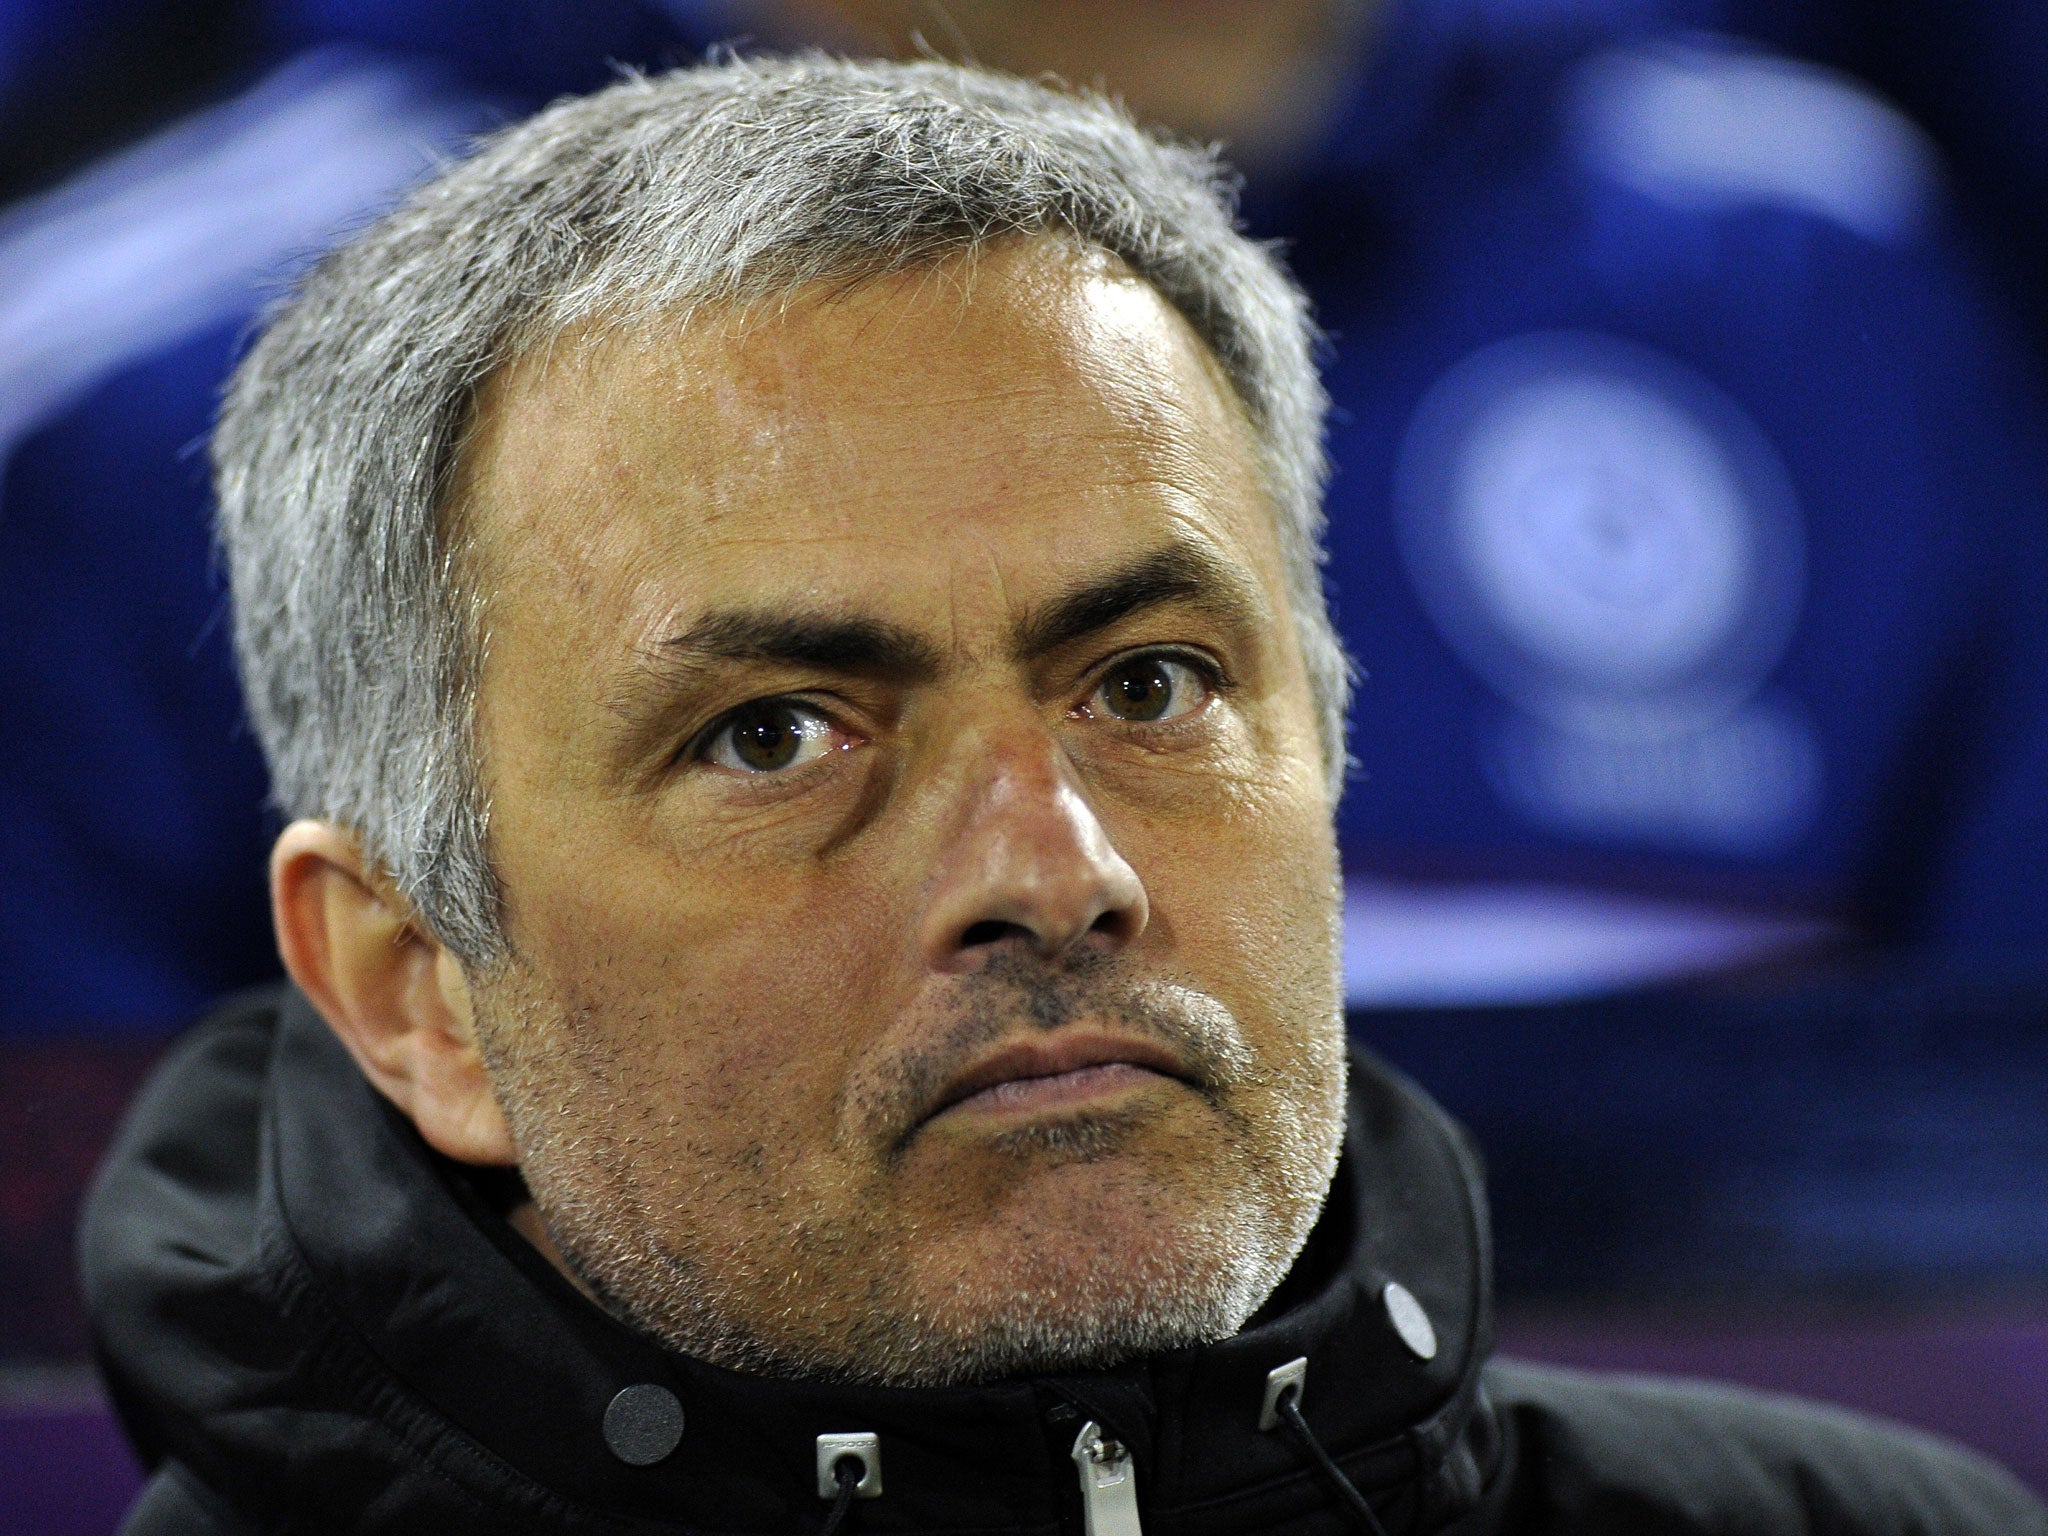 Jose Mourinho looks on from the bench during Chelsea's 1-1 draw with West Brom